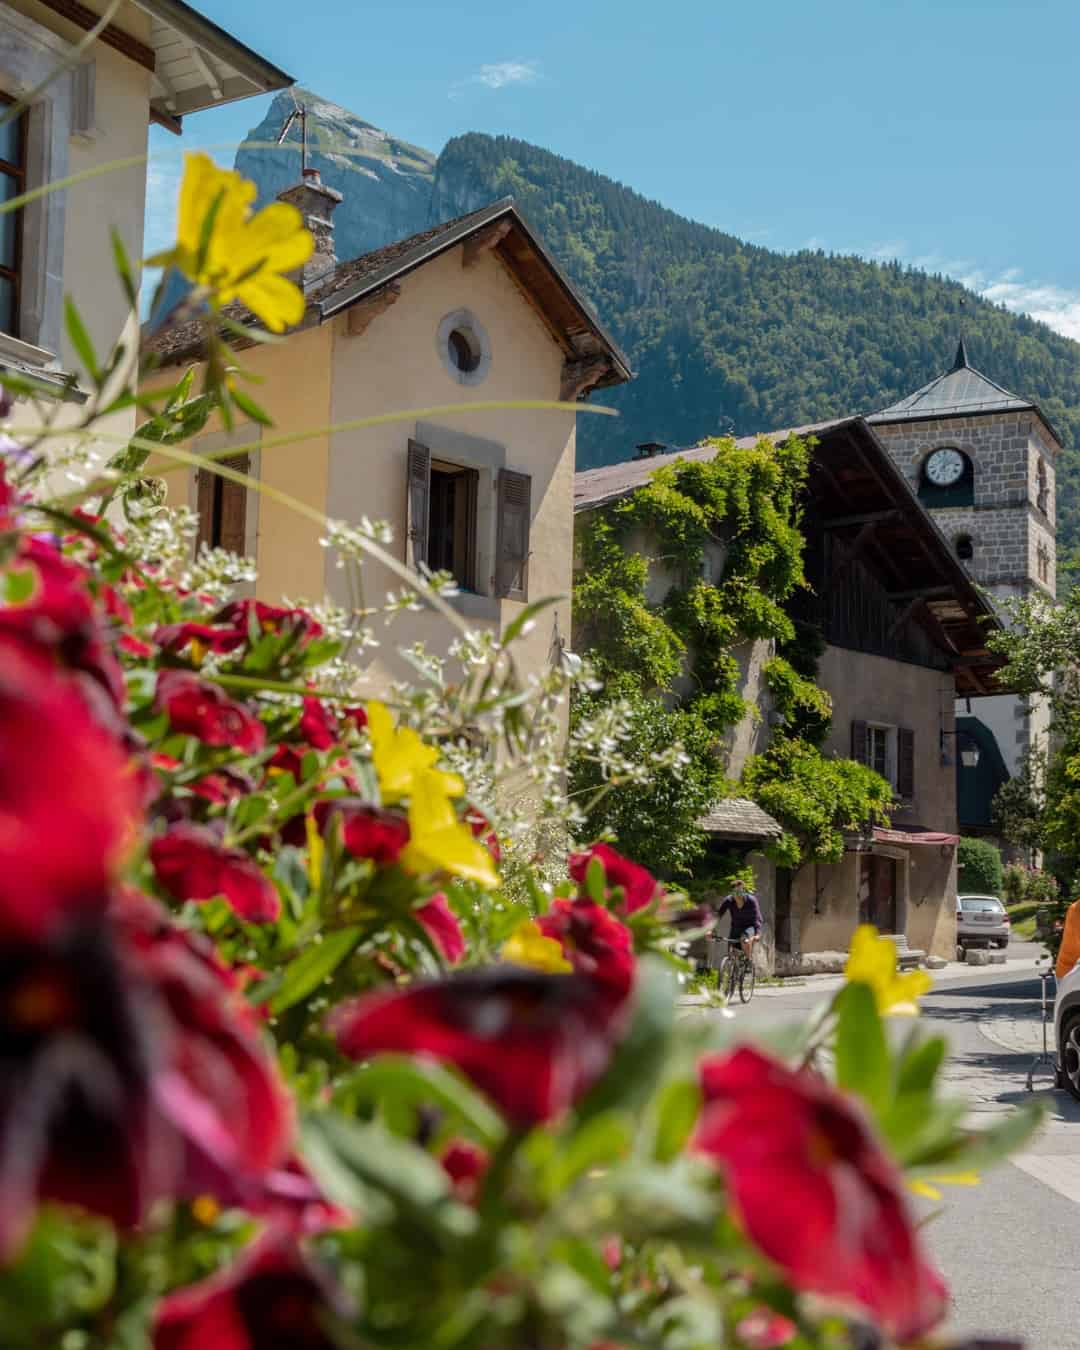 A street in Samoens, pictured through red and yellow flowers